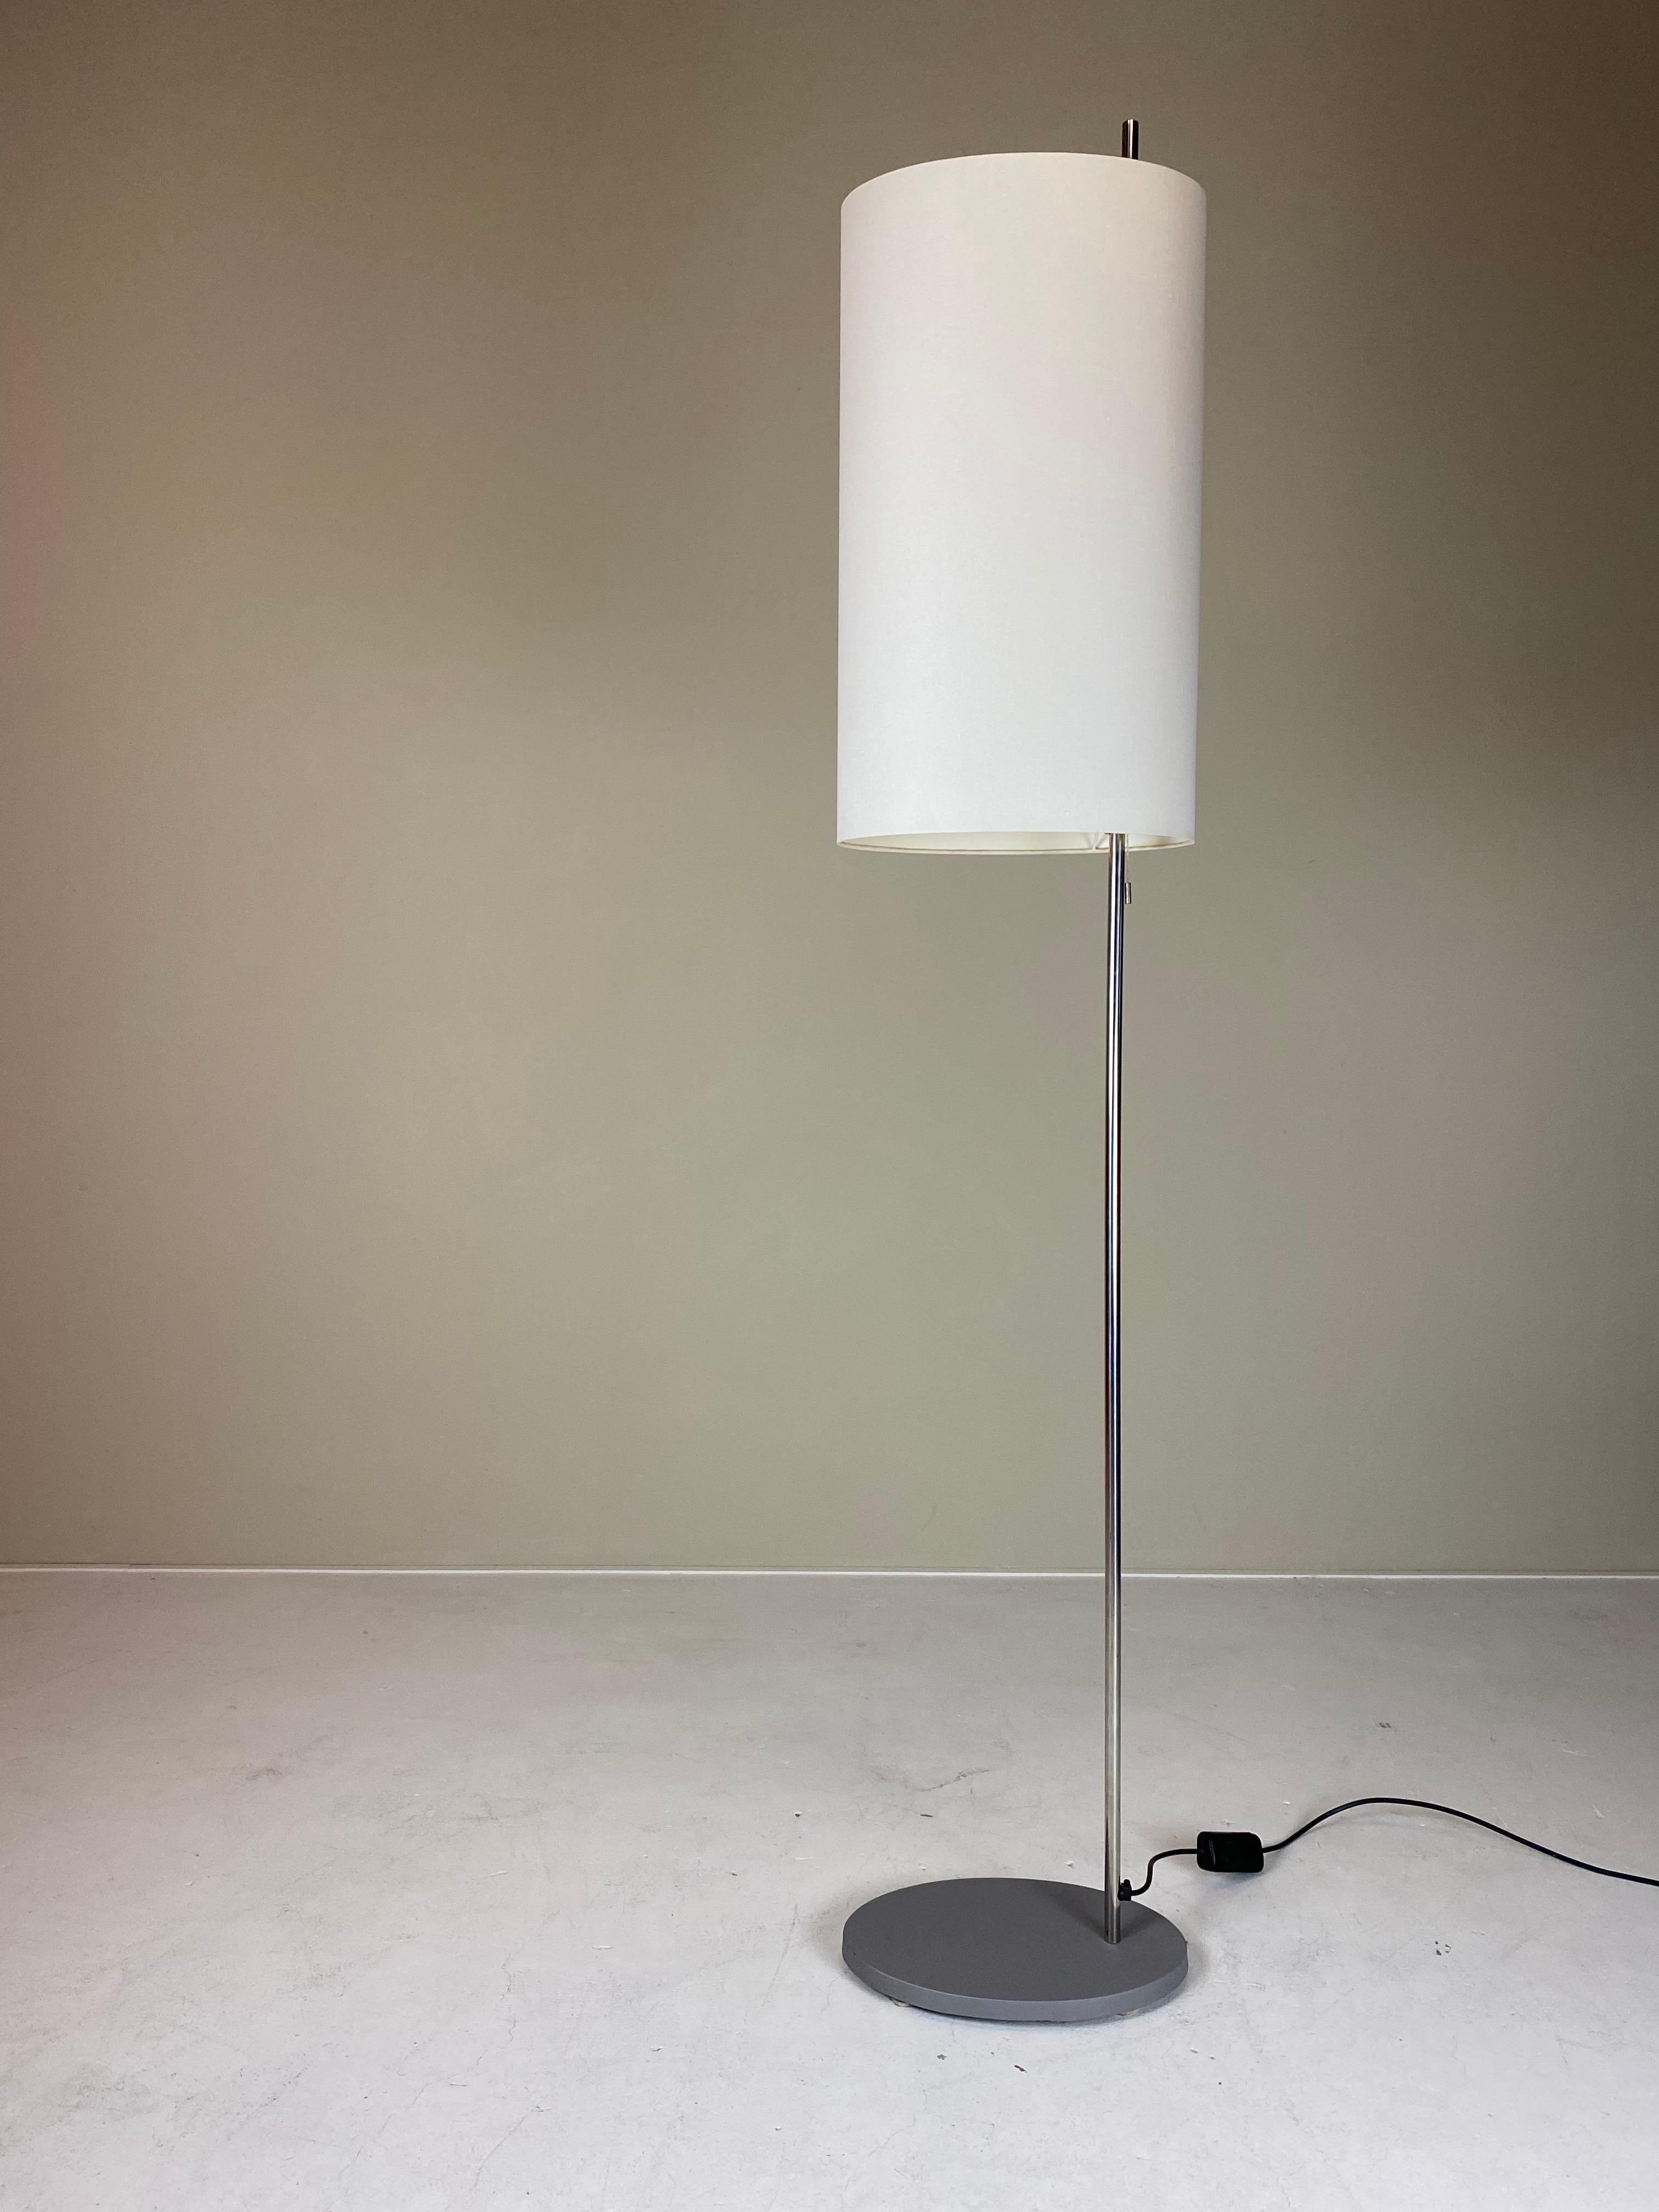 Originally designed in 1958 by Arne Jacobsen for the SAS Royal Hotel Copenhagen, the AJ Royal Floor Lamp has become a real collector’s item. The elegant design and simple shape has made the lamps an iconic piece of Danish design history.

The SAS